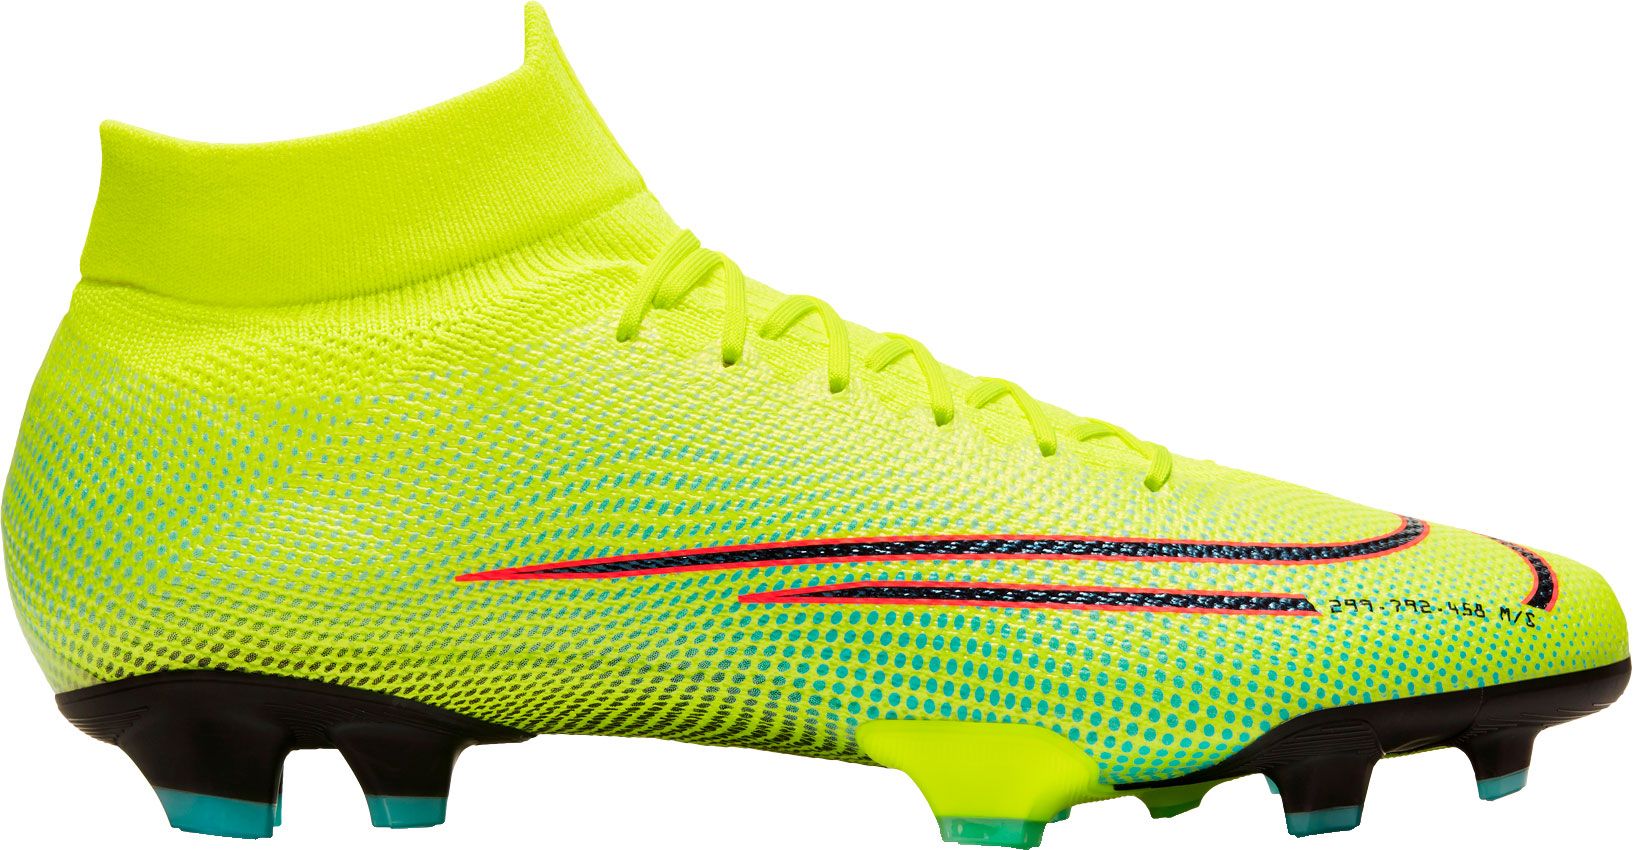 neon yellow soccer cleats